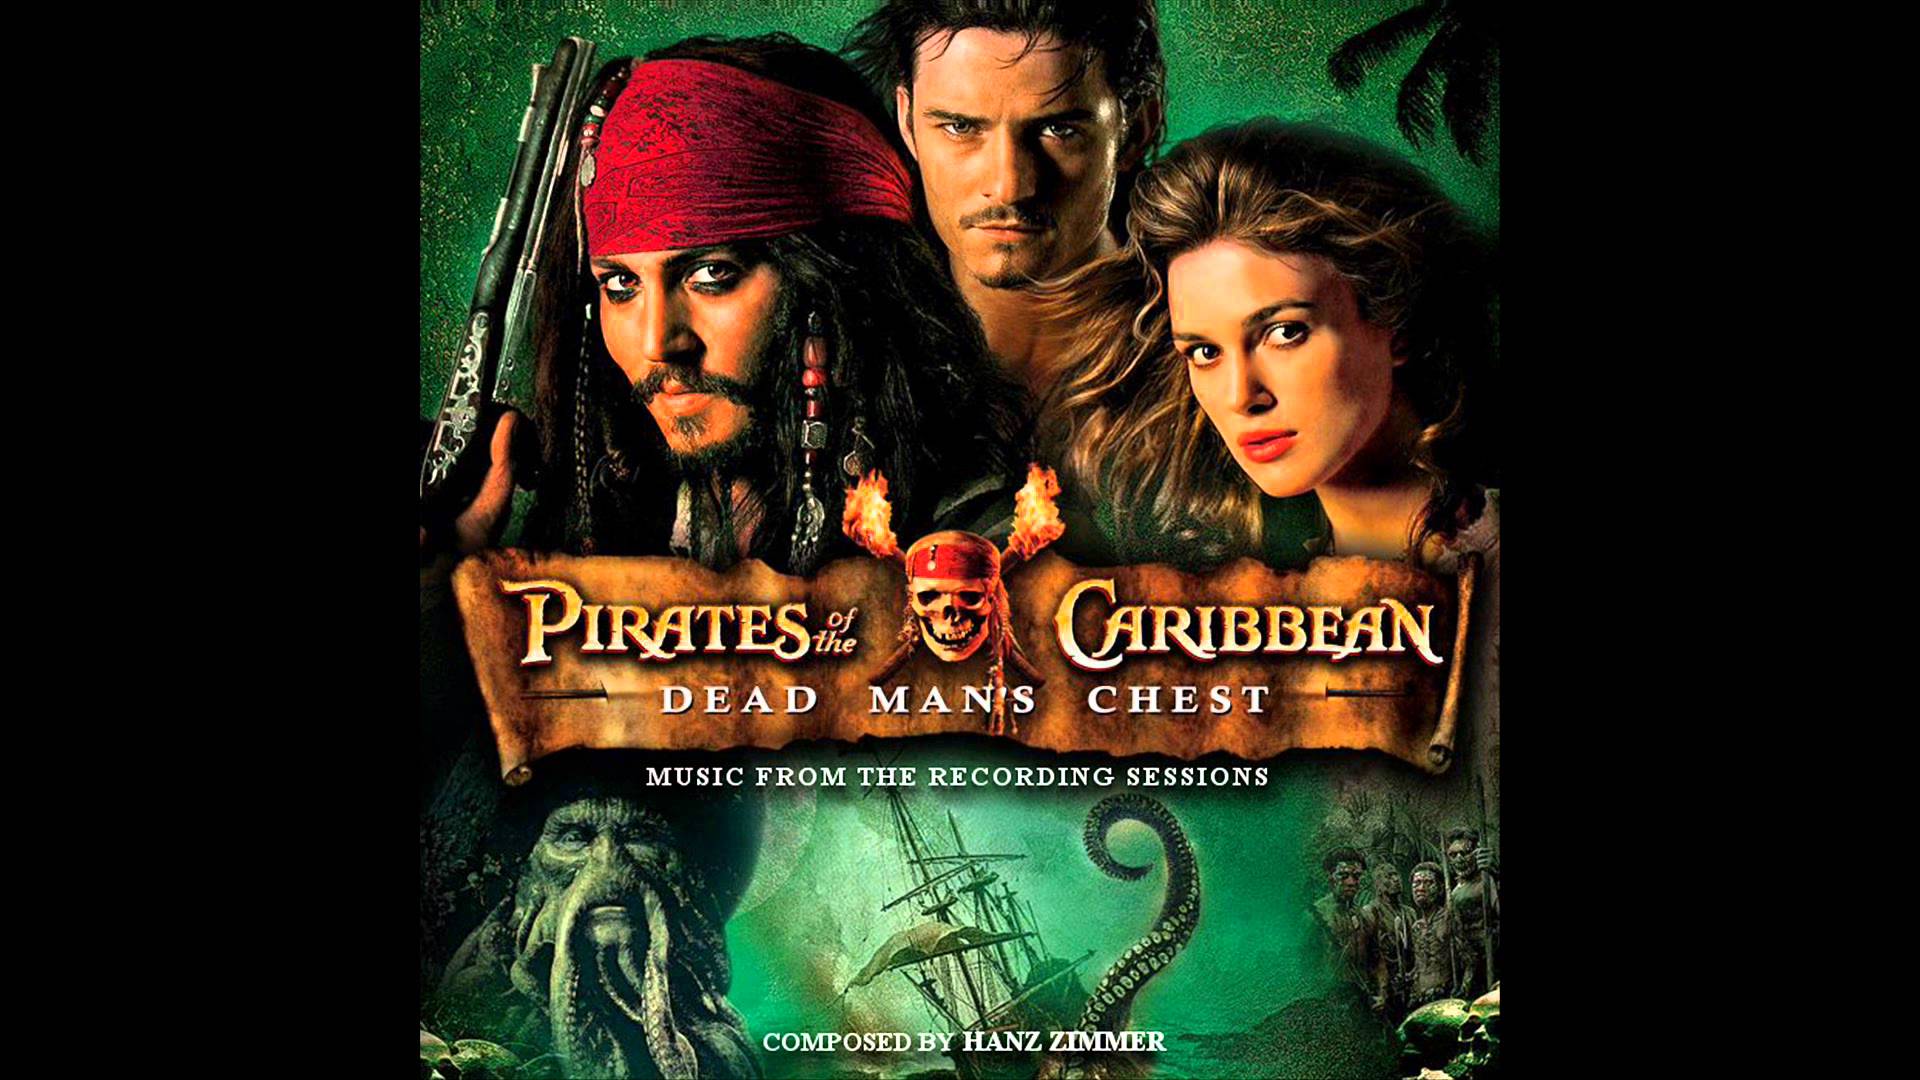 Pirates Of The Caribbean: Dead Man's Chest #2